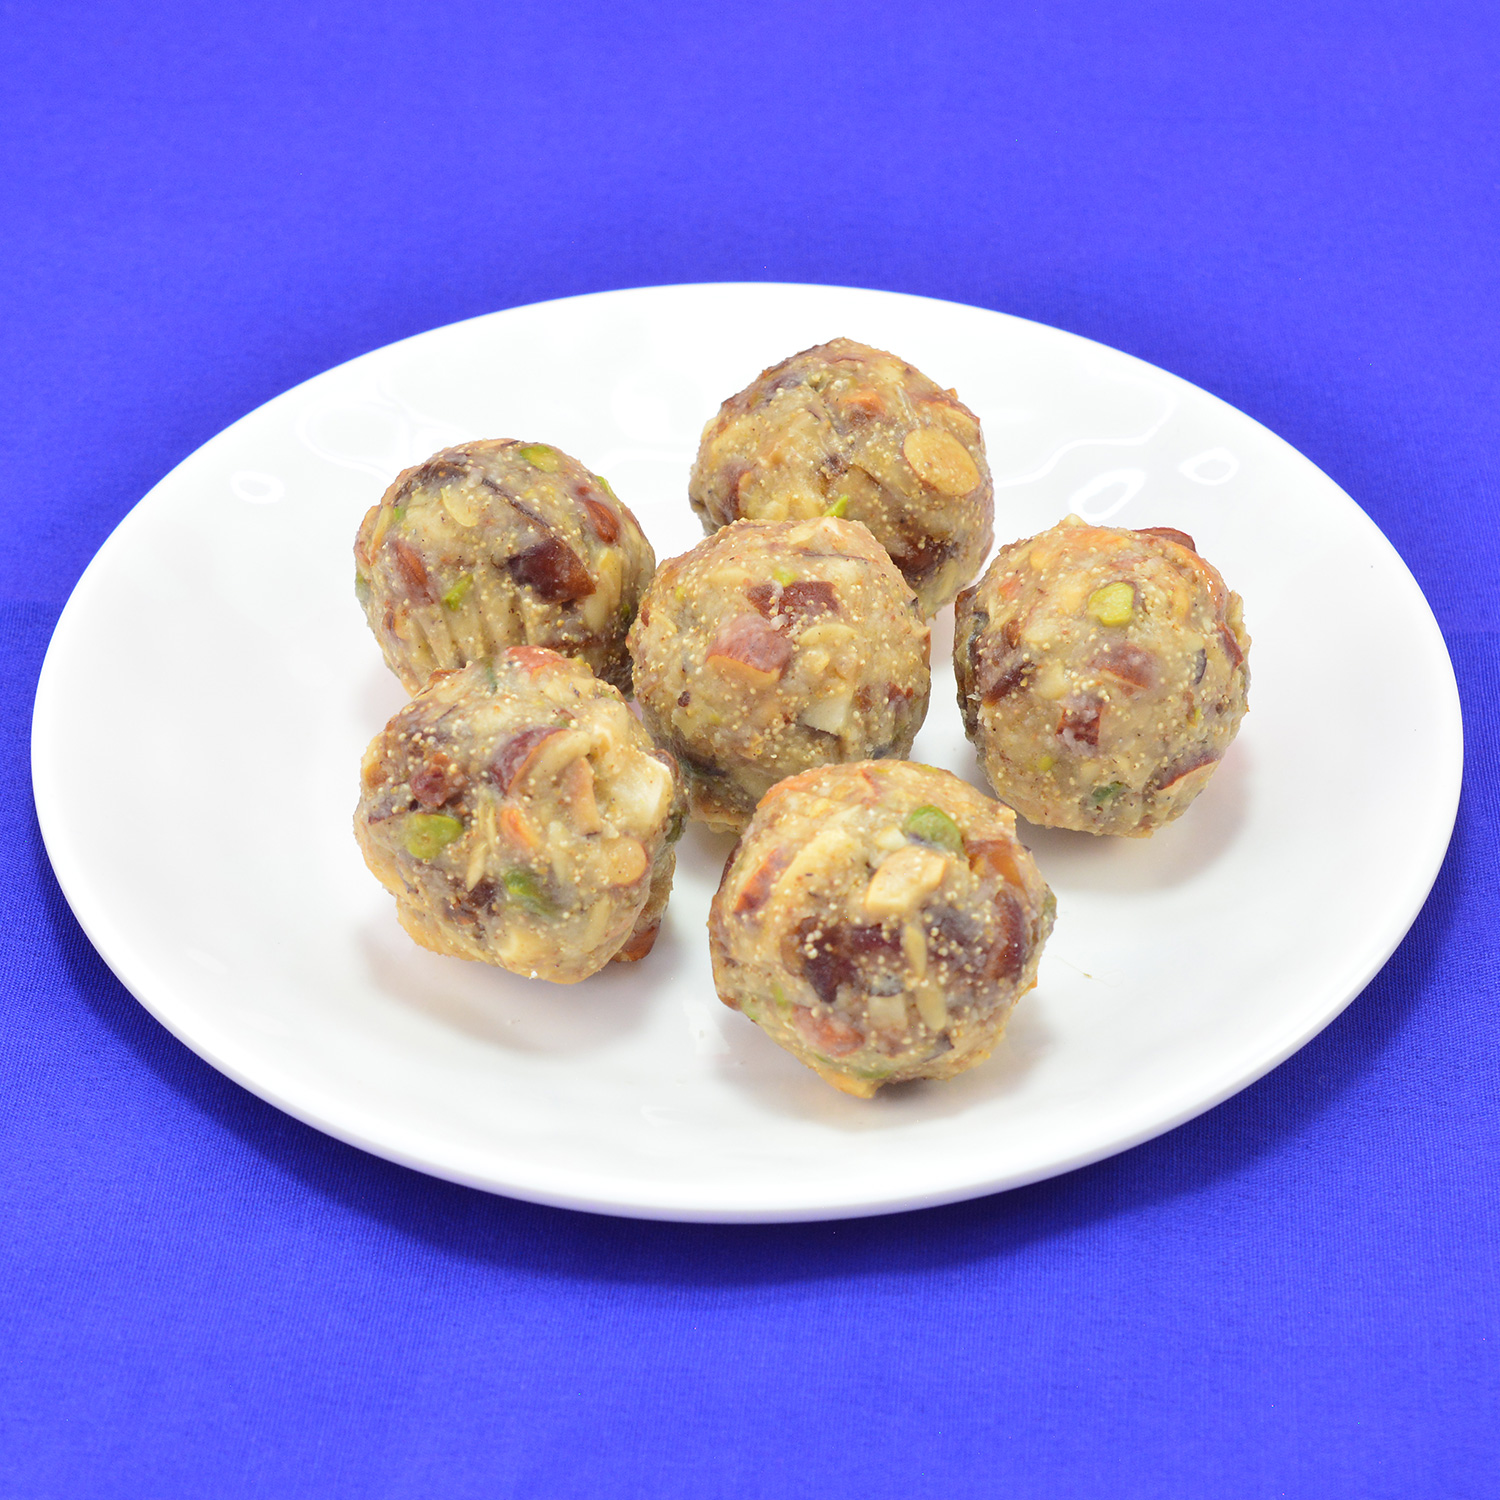 Made of Quality of Dry Fruits - Tasty Dry Fruit Laddu